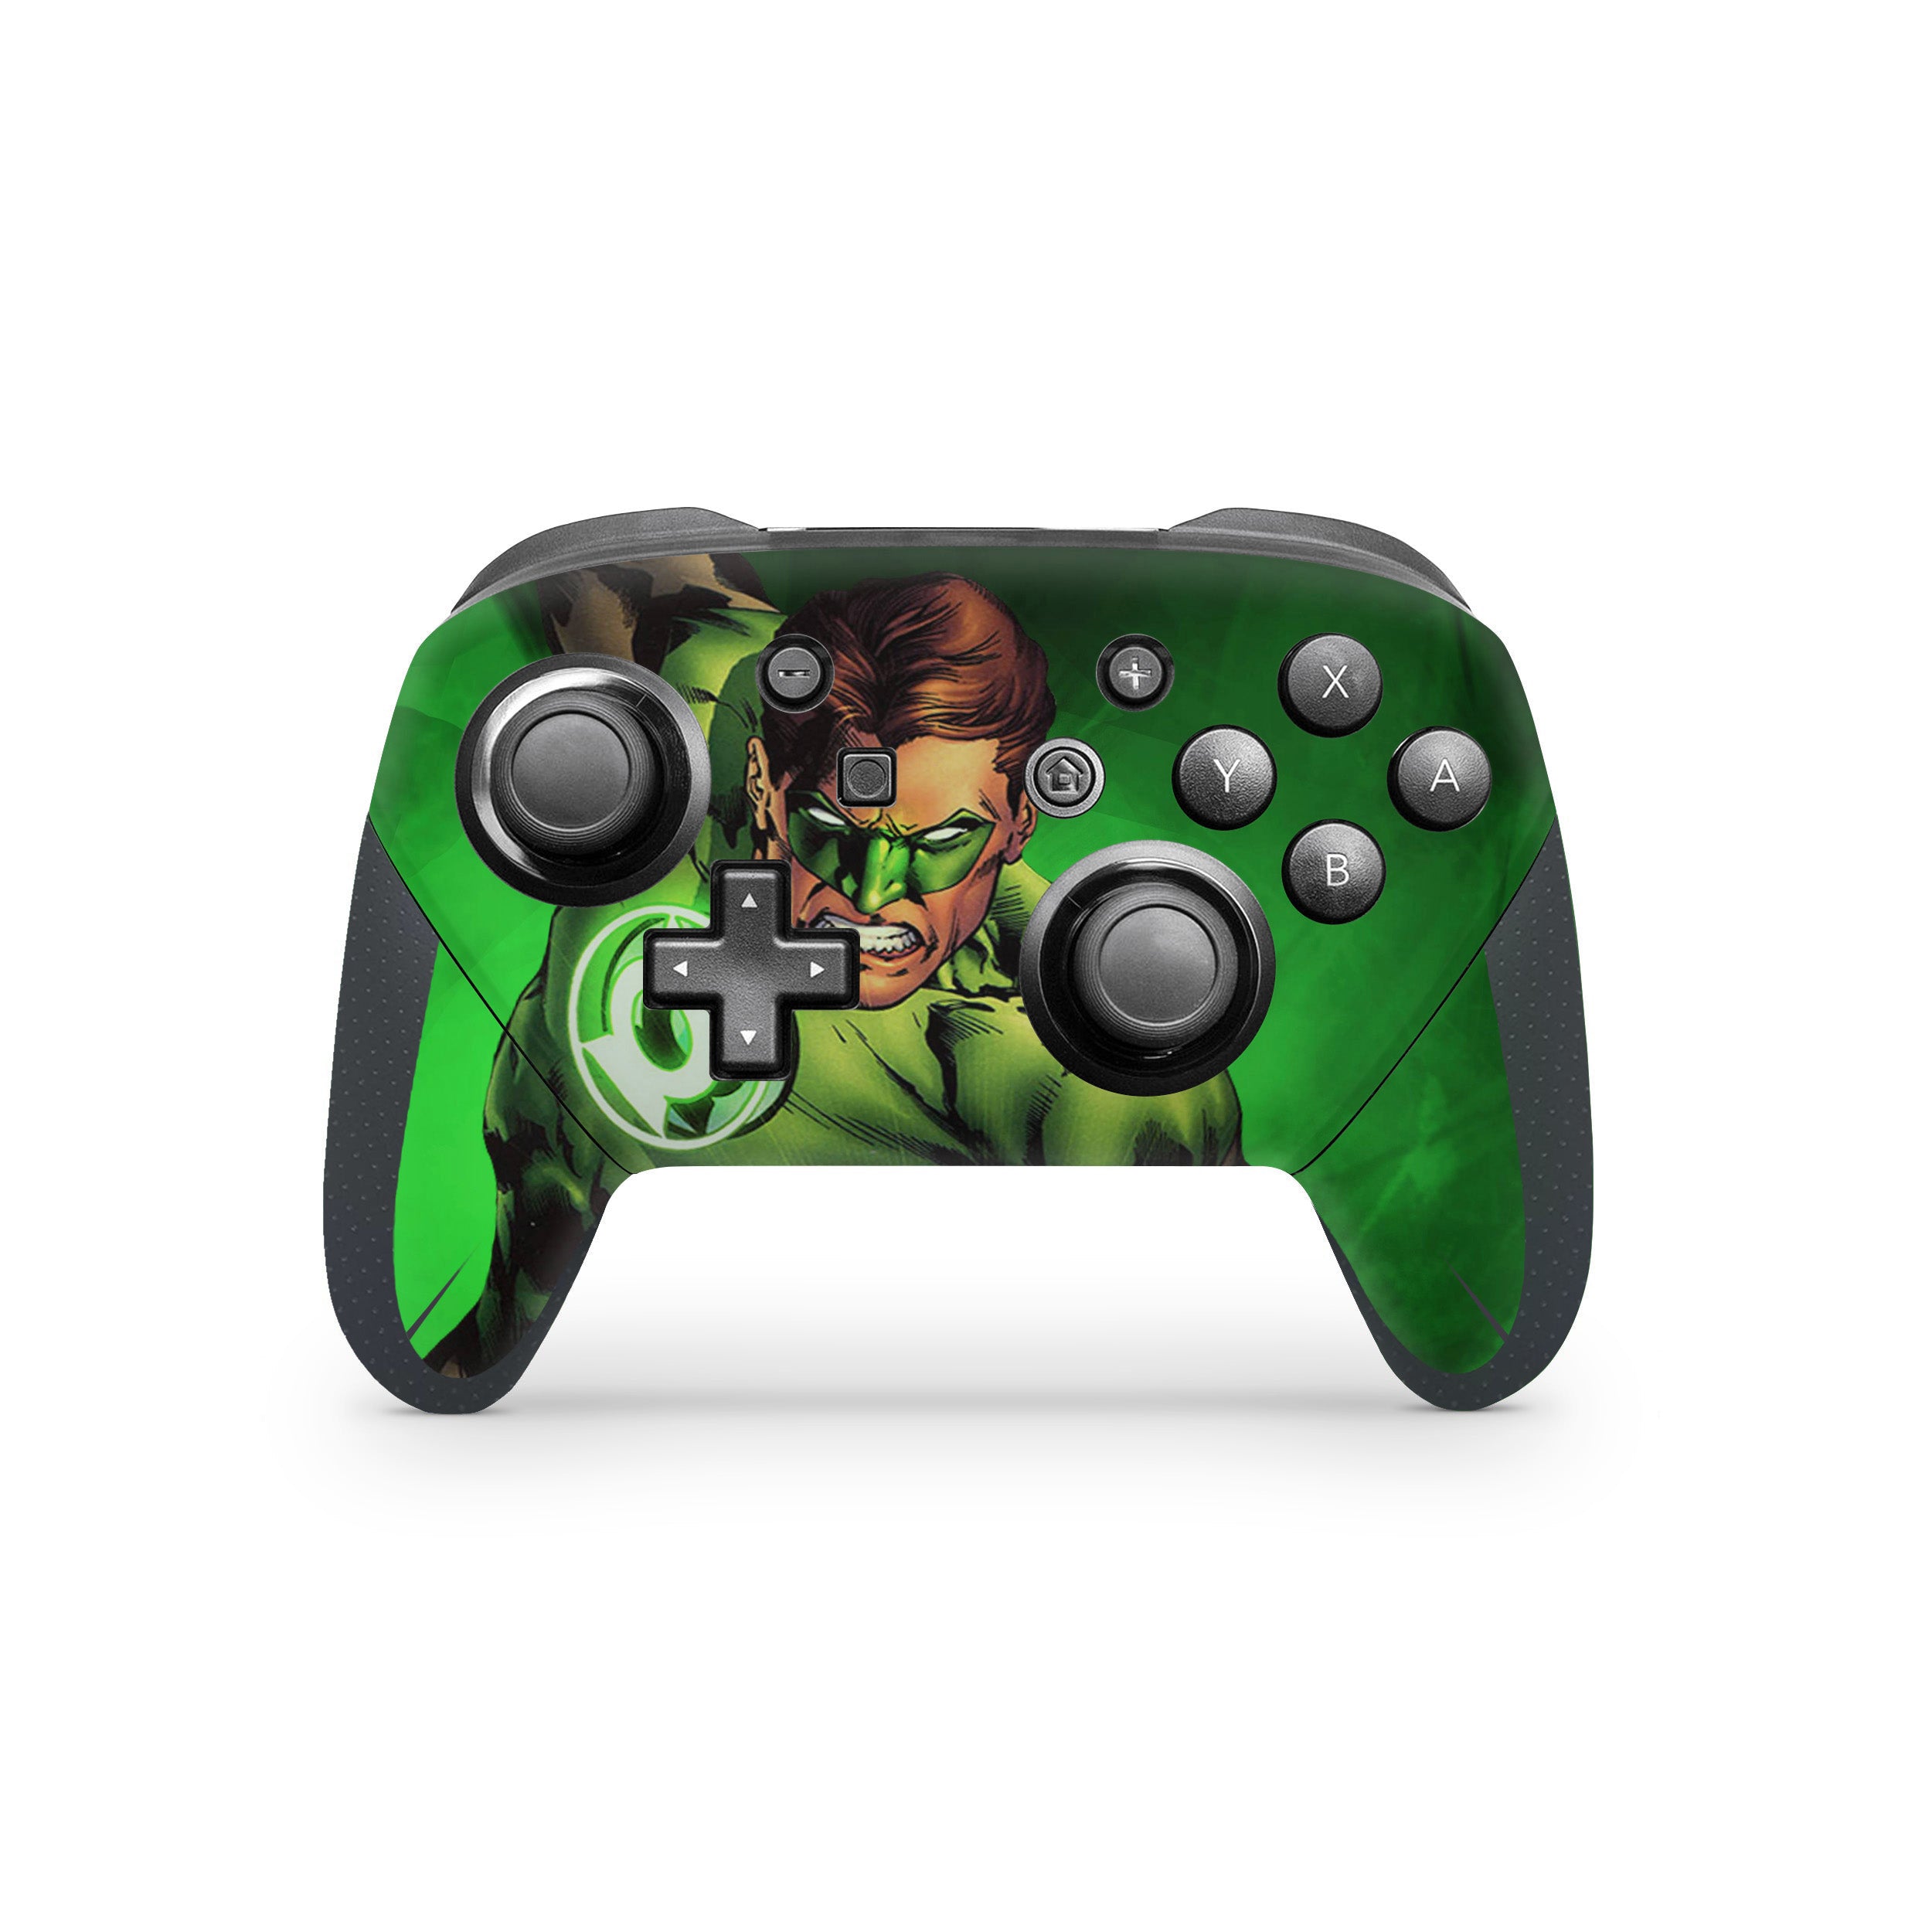 A video game skin featuring a Marvel Green Lantern design for the Switch Pro Controller.